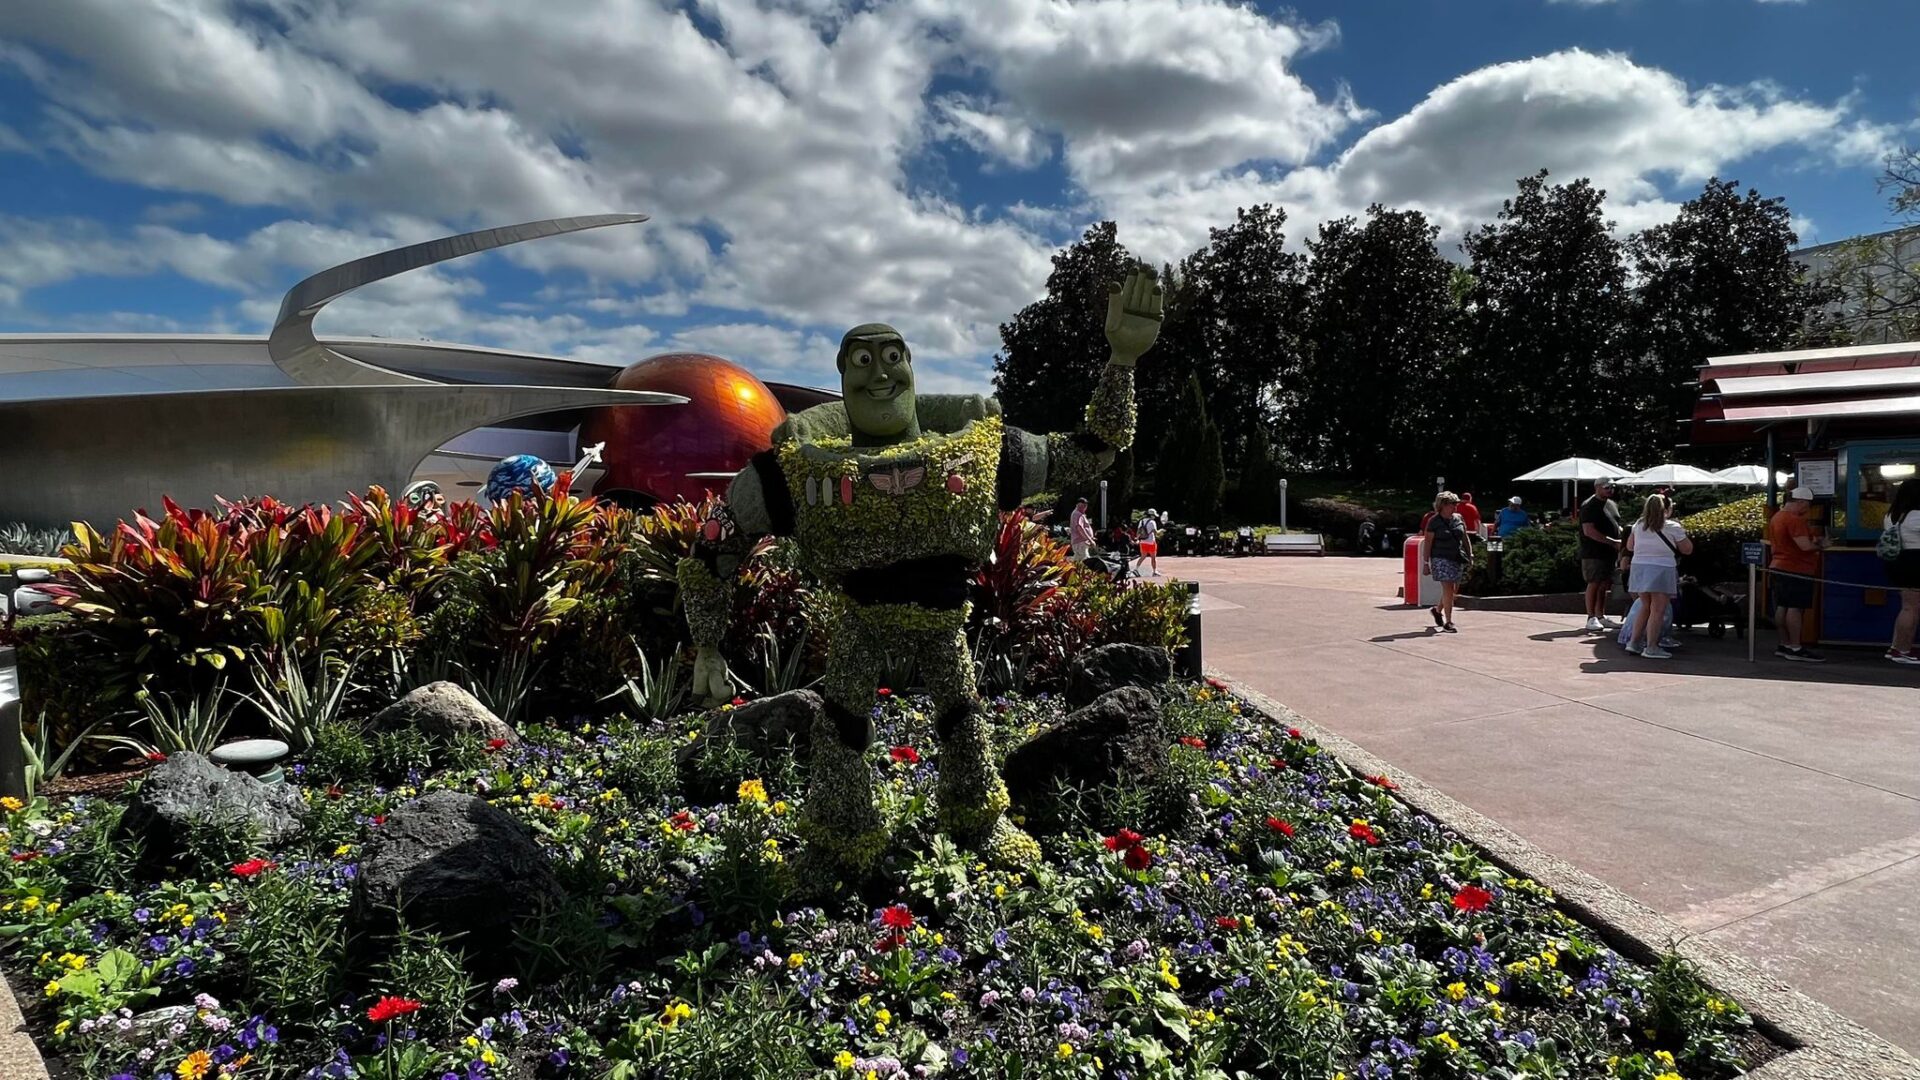 Flower & Garden Festival Topiaries Starting to Arrive at EPCOT for 2023